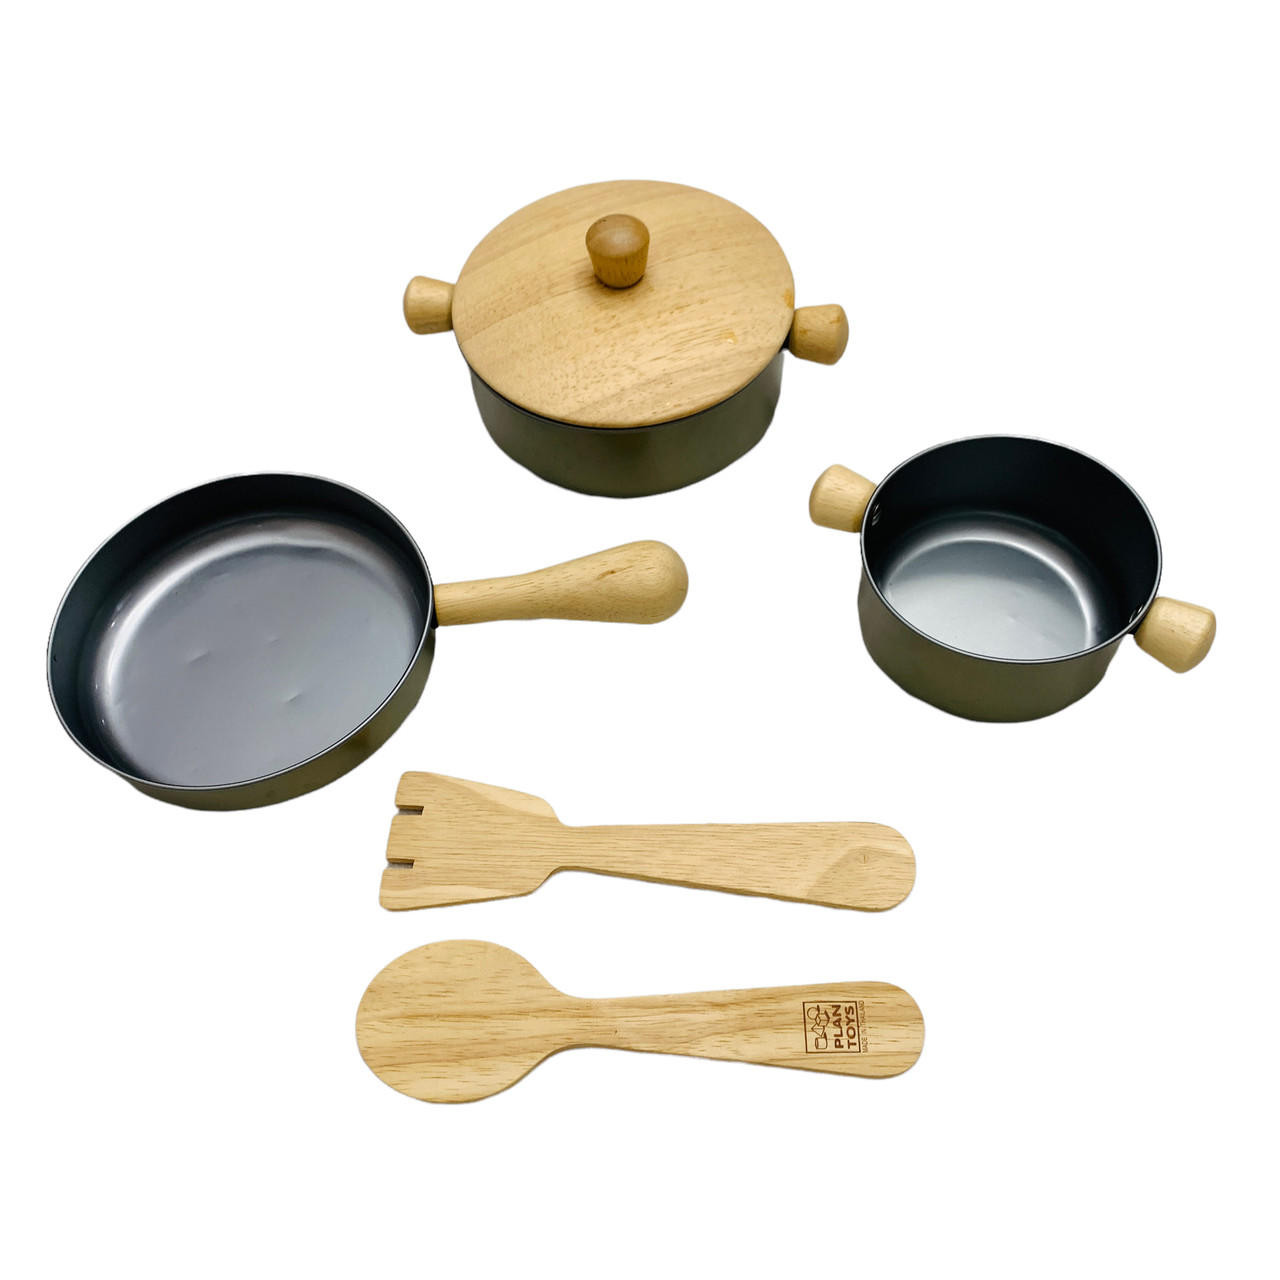 https://cdn11.bigcommerce.com/s-dh8qgqum9n/images/stencil/1280x1280/products/5472/25125/plan-toys-wooden-and-metal-cooking-play-set-utensils-pots-and-pans-kitchen-cooking__32096.1659106648.jpg?c=1